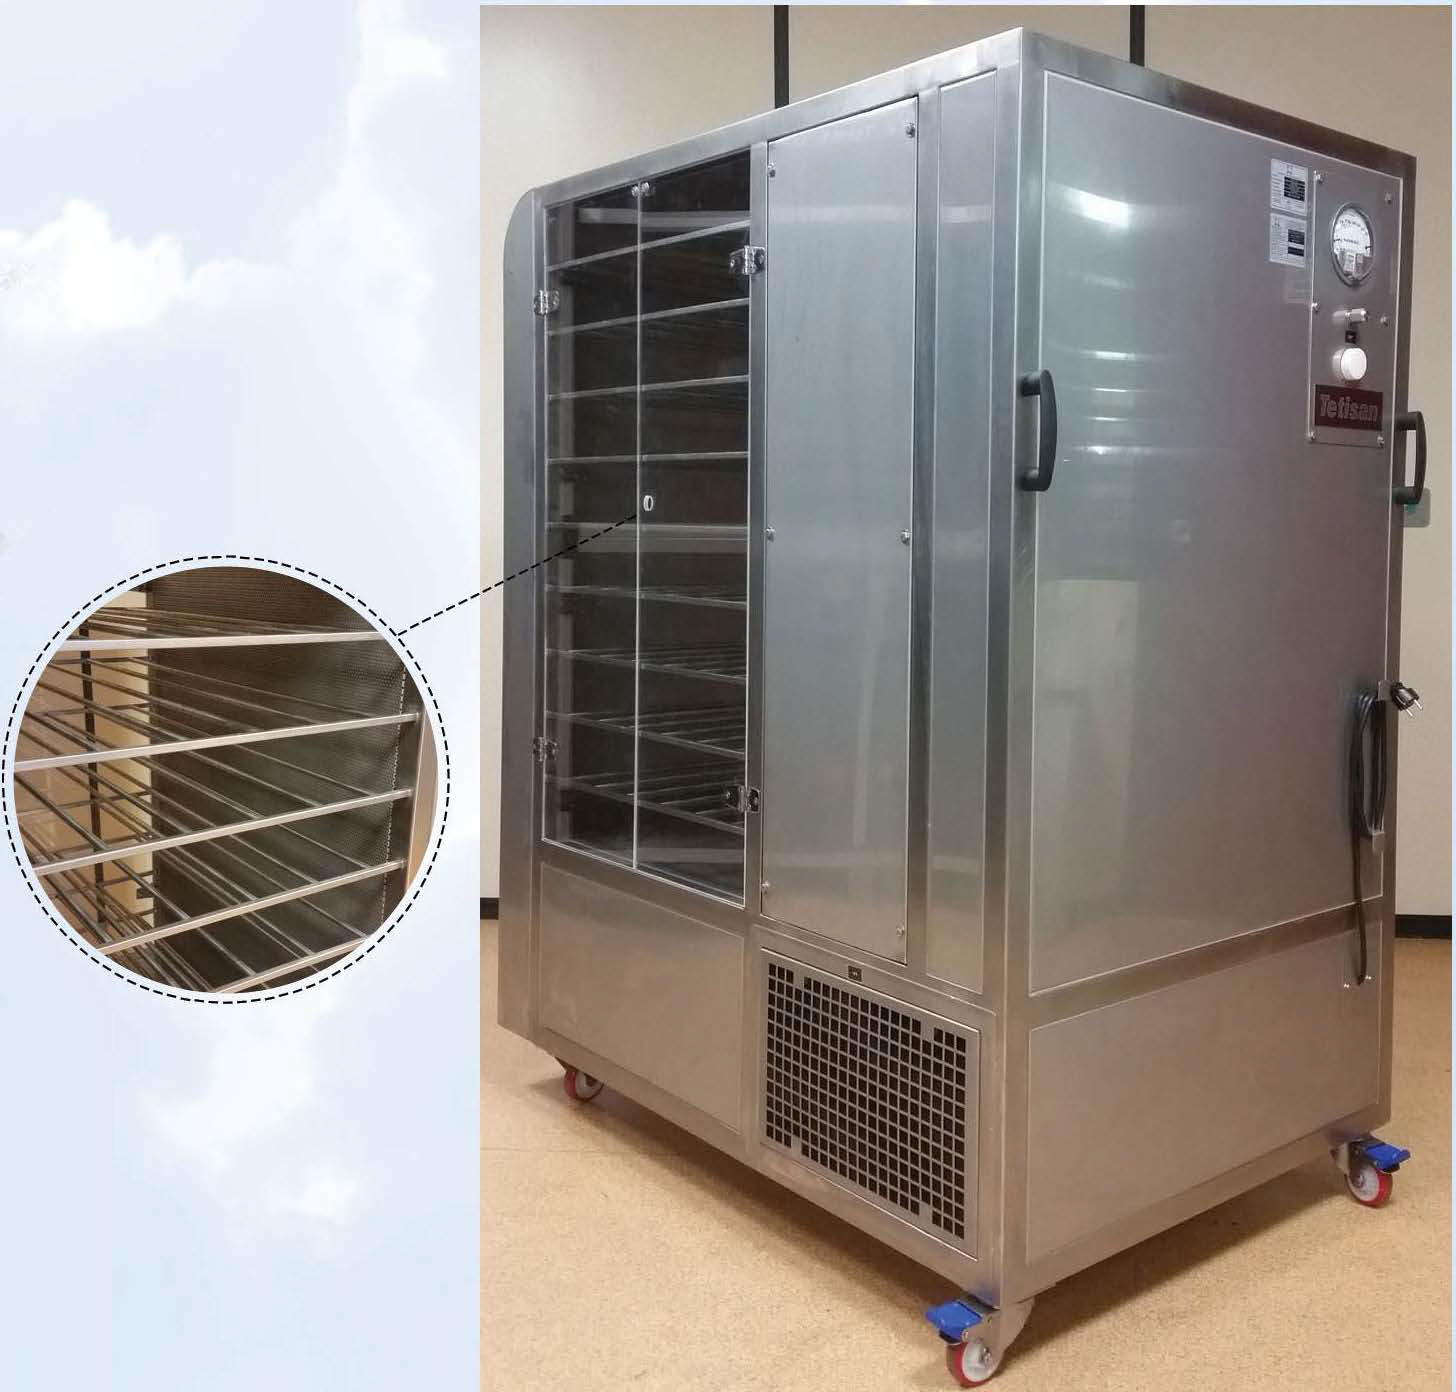 Mobile Laminar Air Flow Unit is designed for transporting sterile products under ISO Class 5 (Class 100) particle free work area to ensure product integrity.